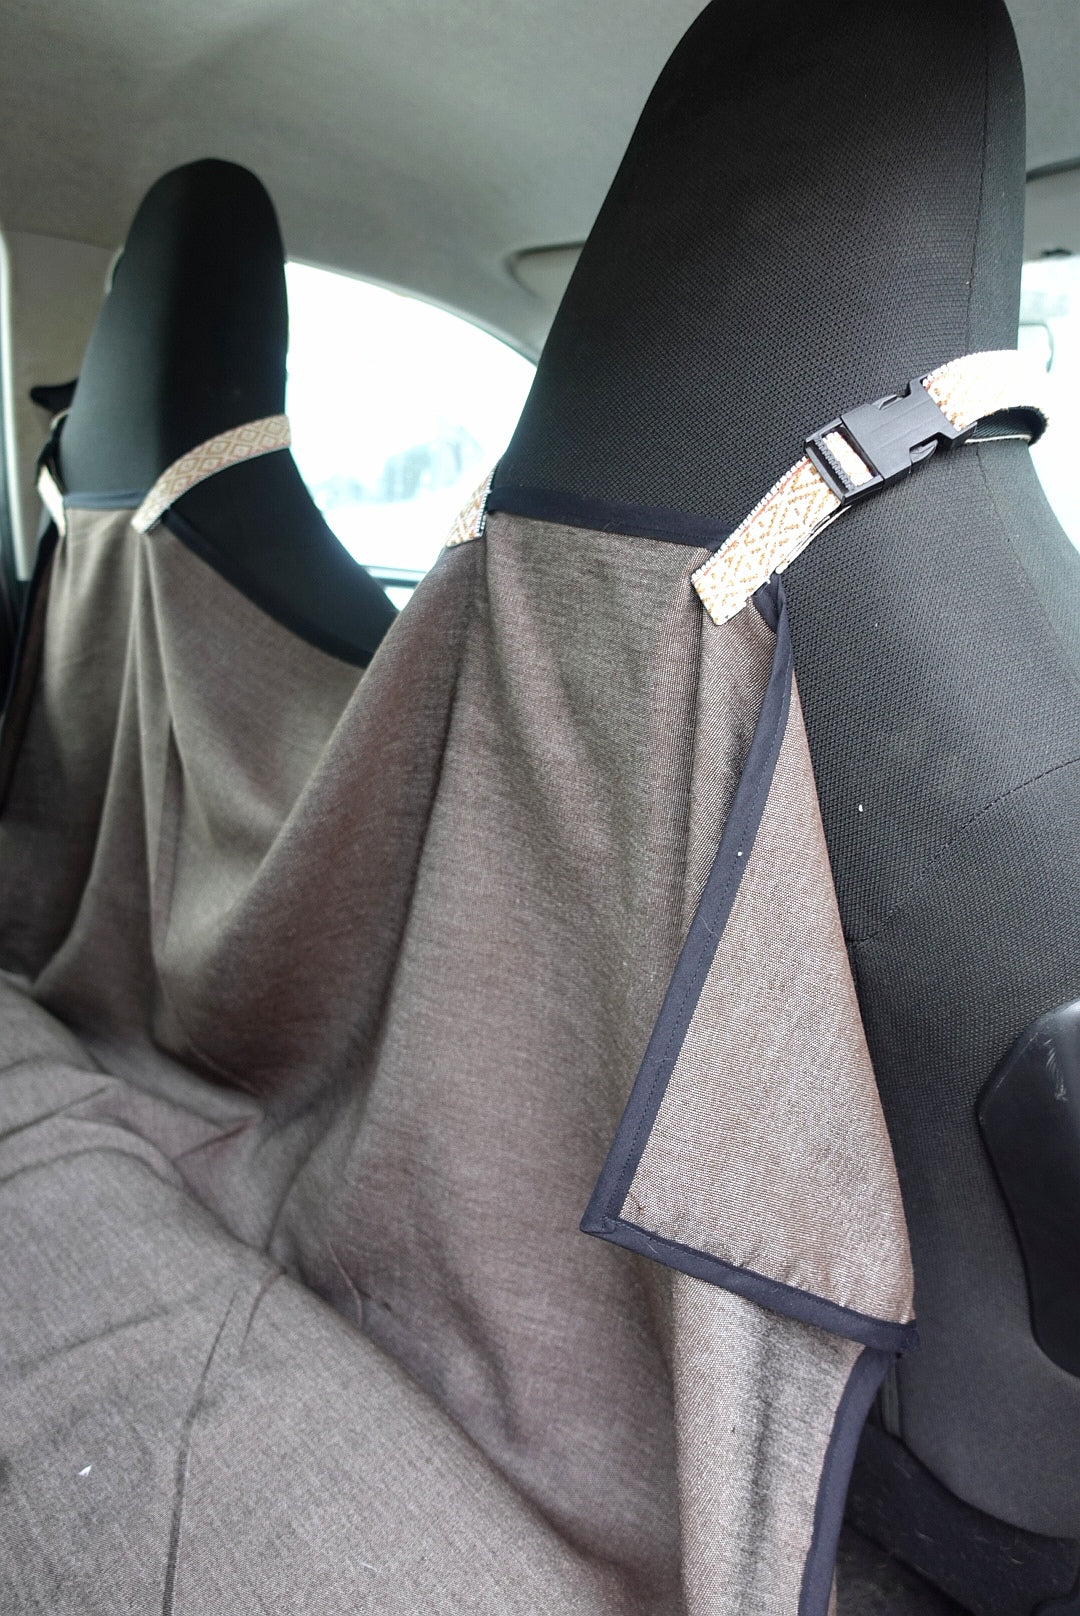 Car Seat Cover for Dogs